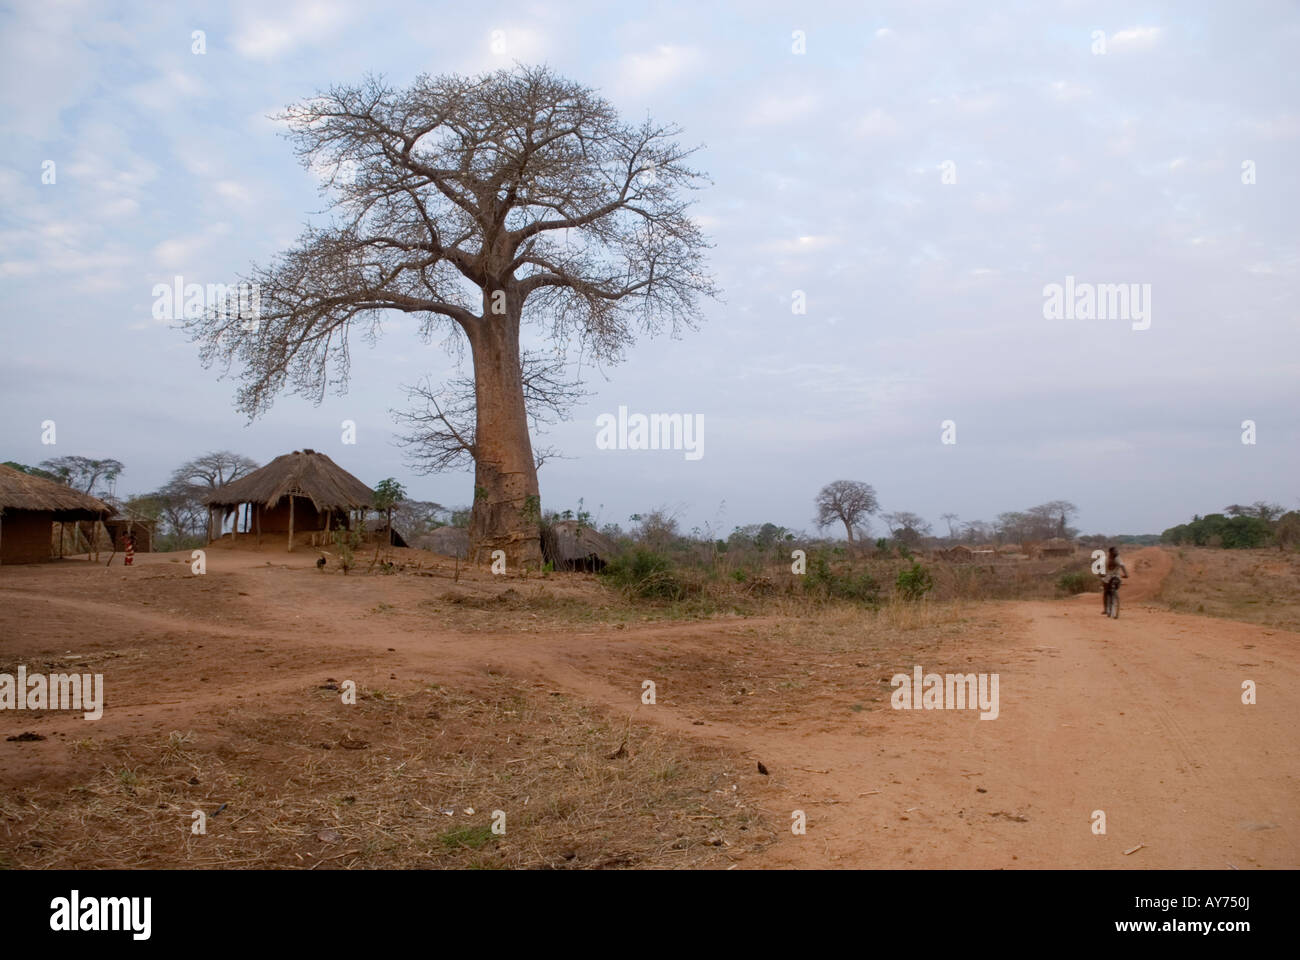 Isolated baobab tree near a village along a dirt road in Northern Mozambique. Stock Photo